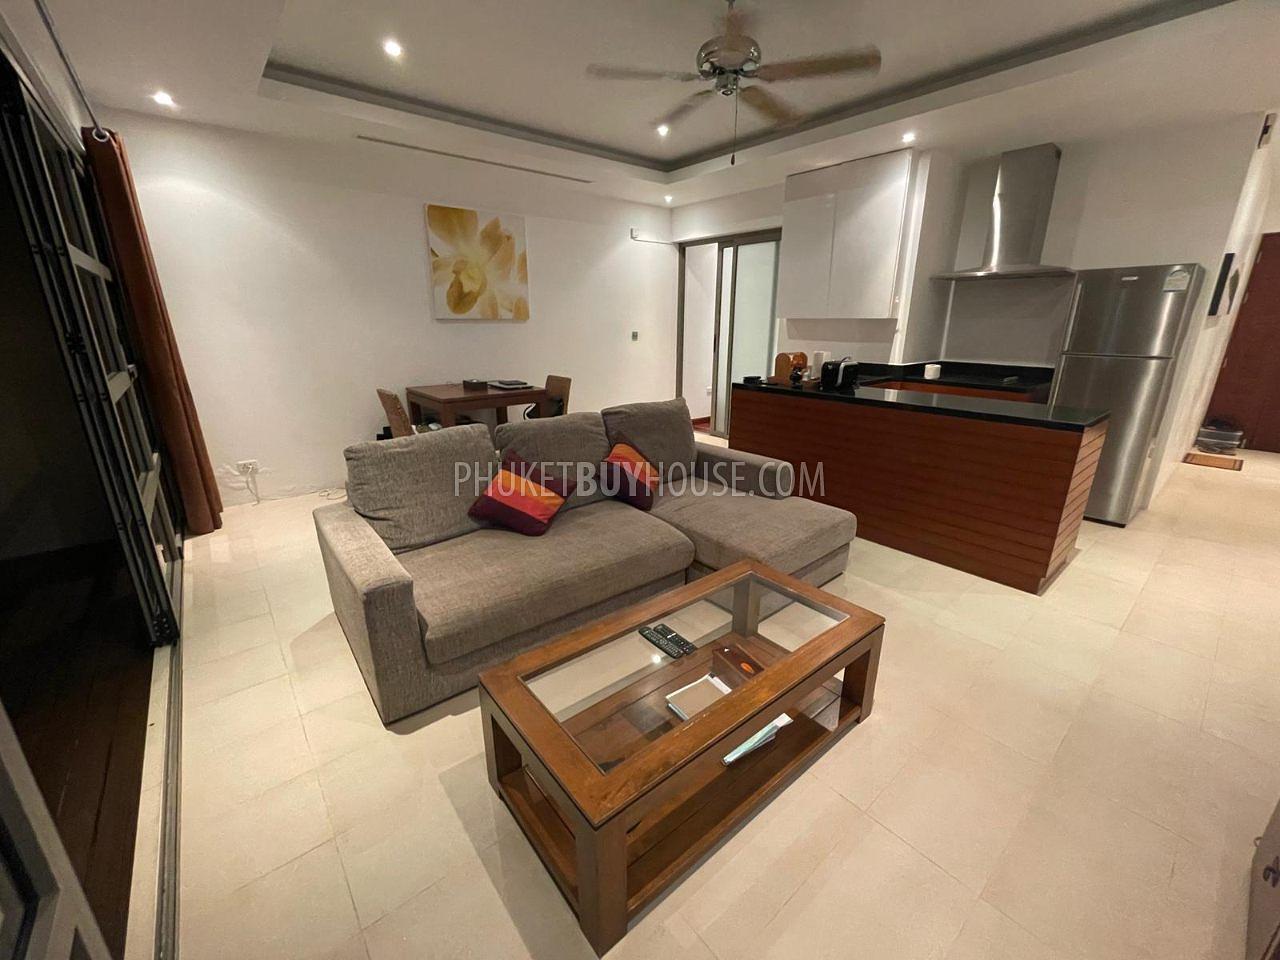 BAN6988: Lovely 1 bedroom House for Sale in Bang Tao area. Photo #10